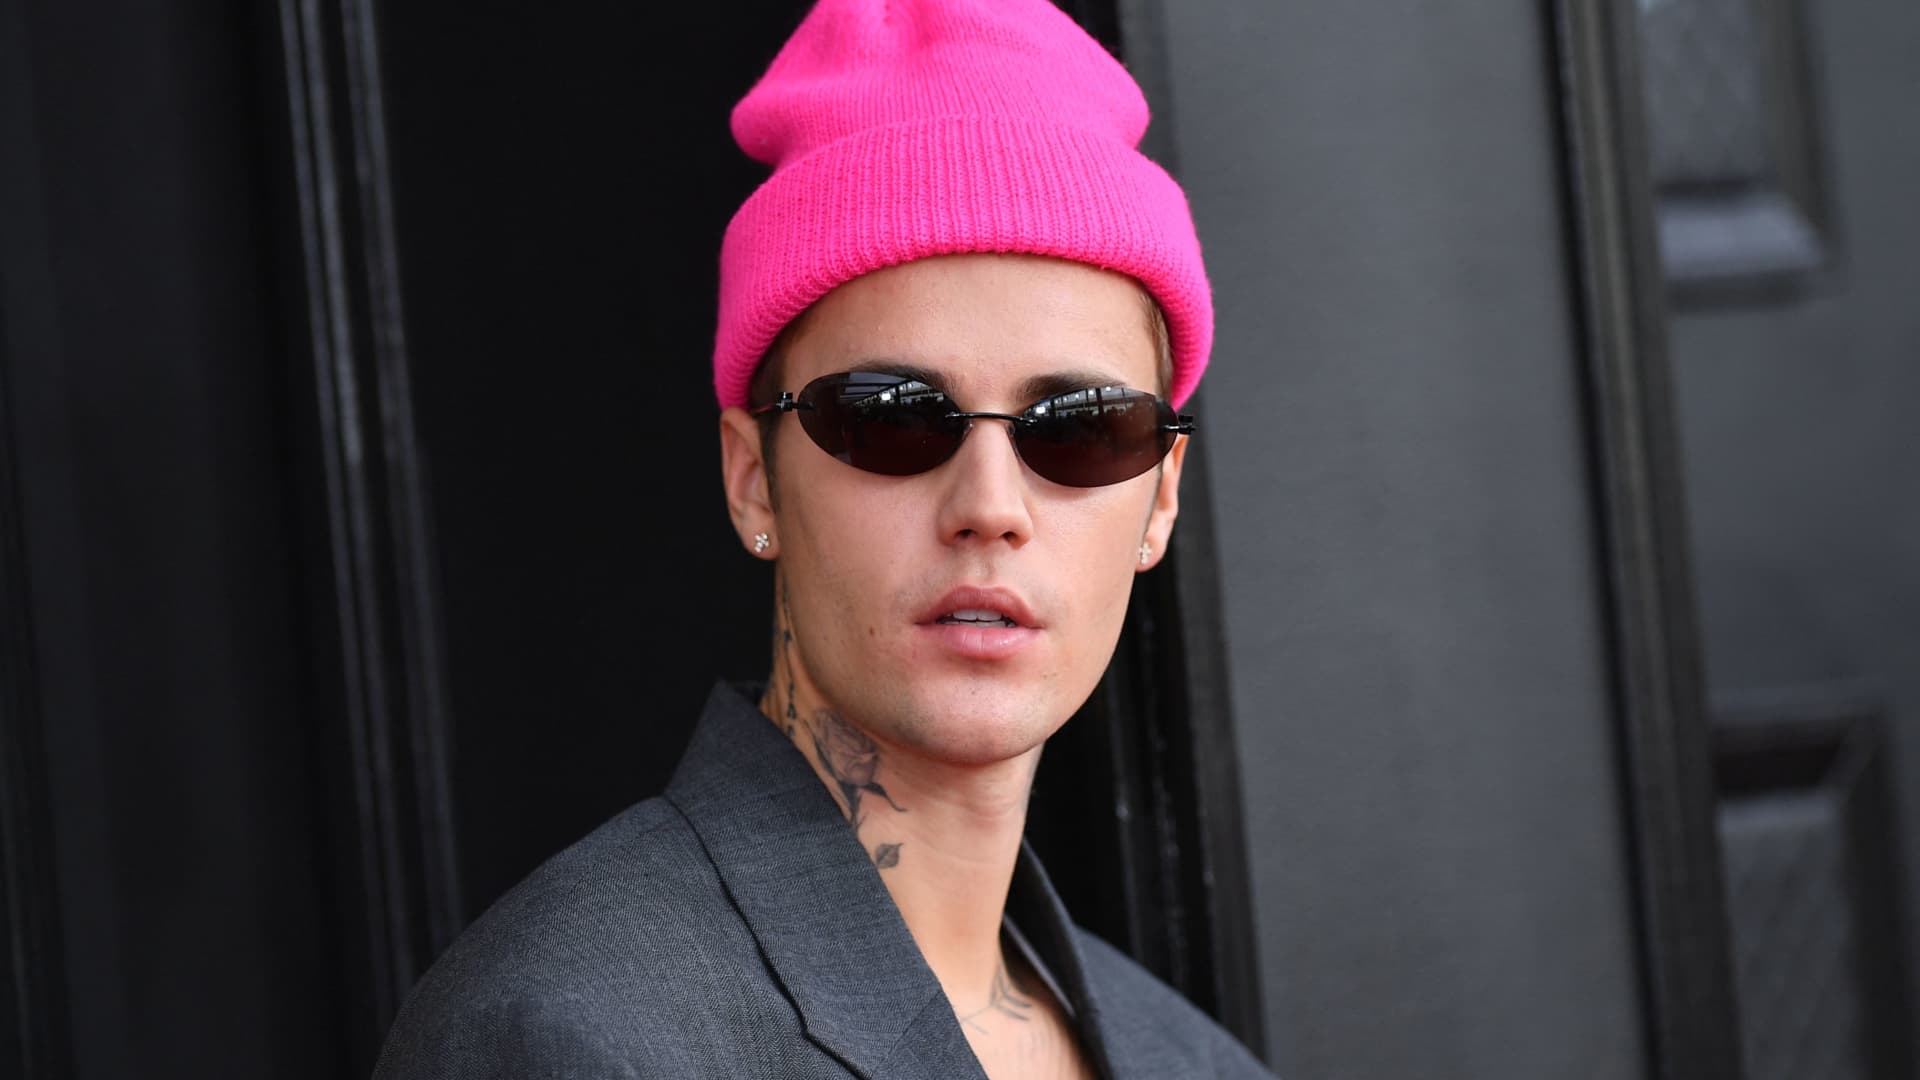 H&M removes Justin Bieber merchandise following criticism from pop star